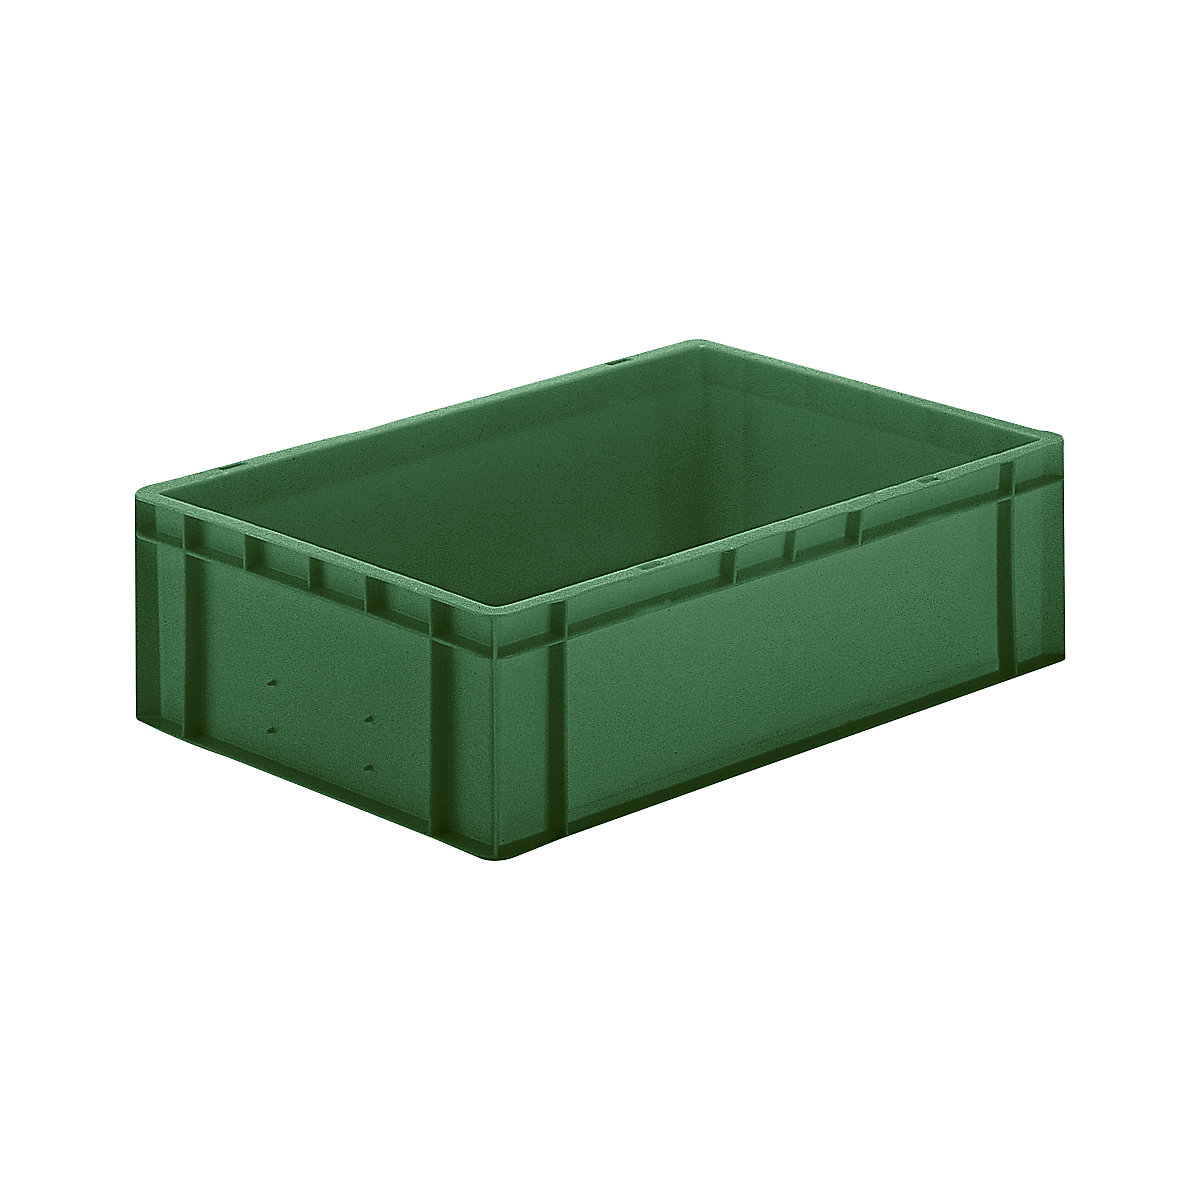 Euro stacking container, closed walls and base, LxWxH 600 x 400 x 175 mm, green, pack of 5-7